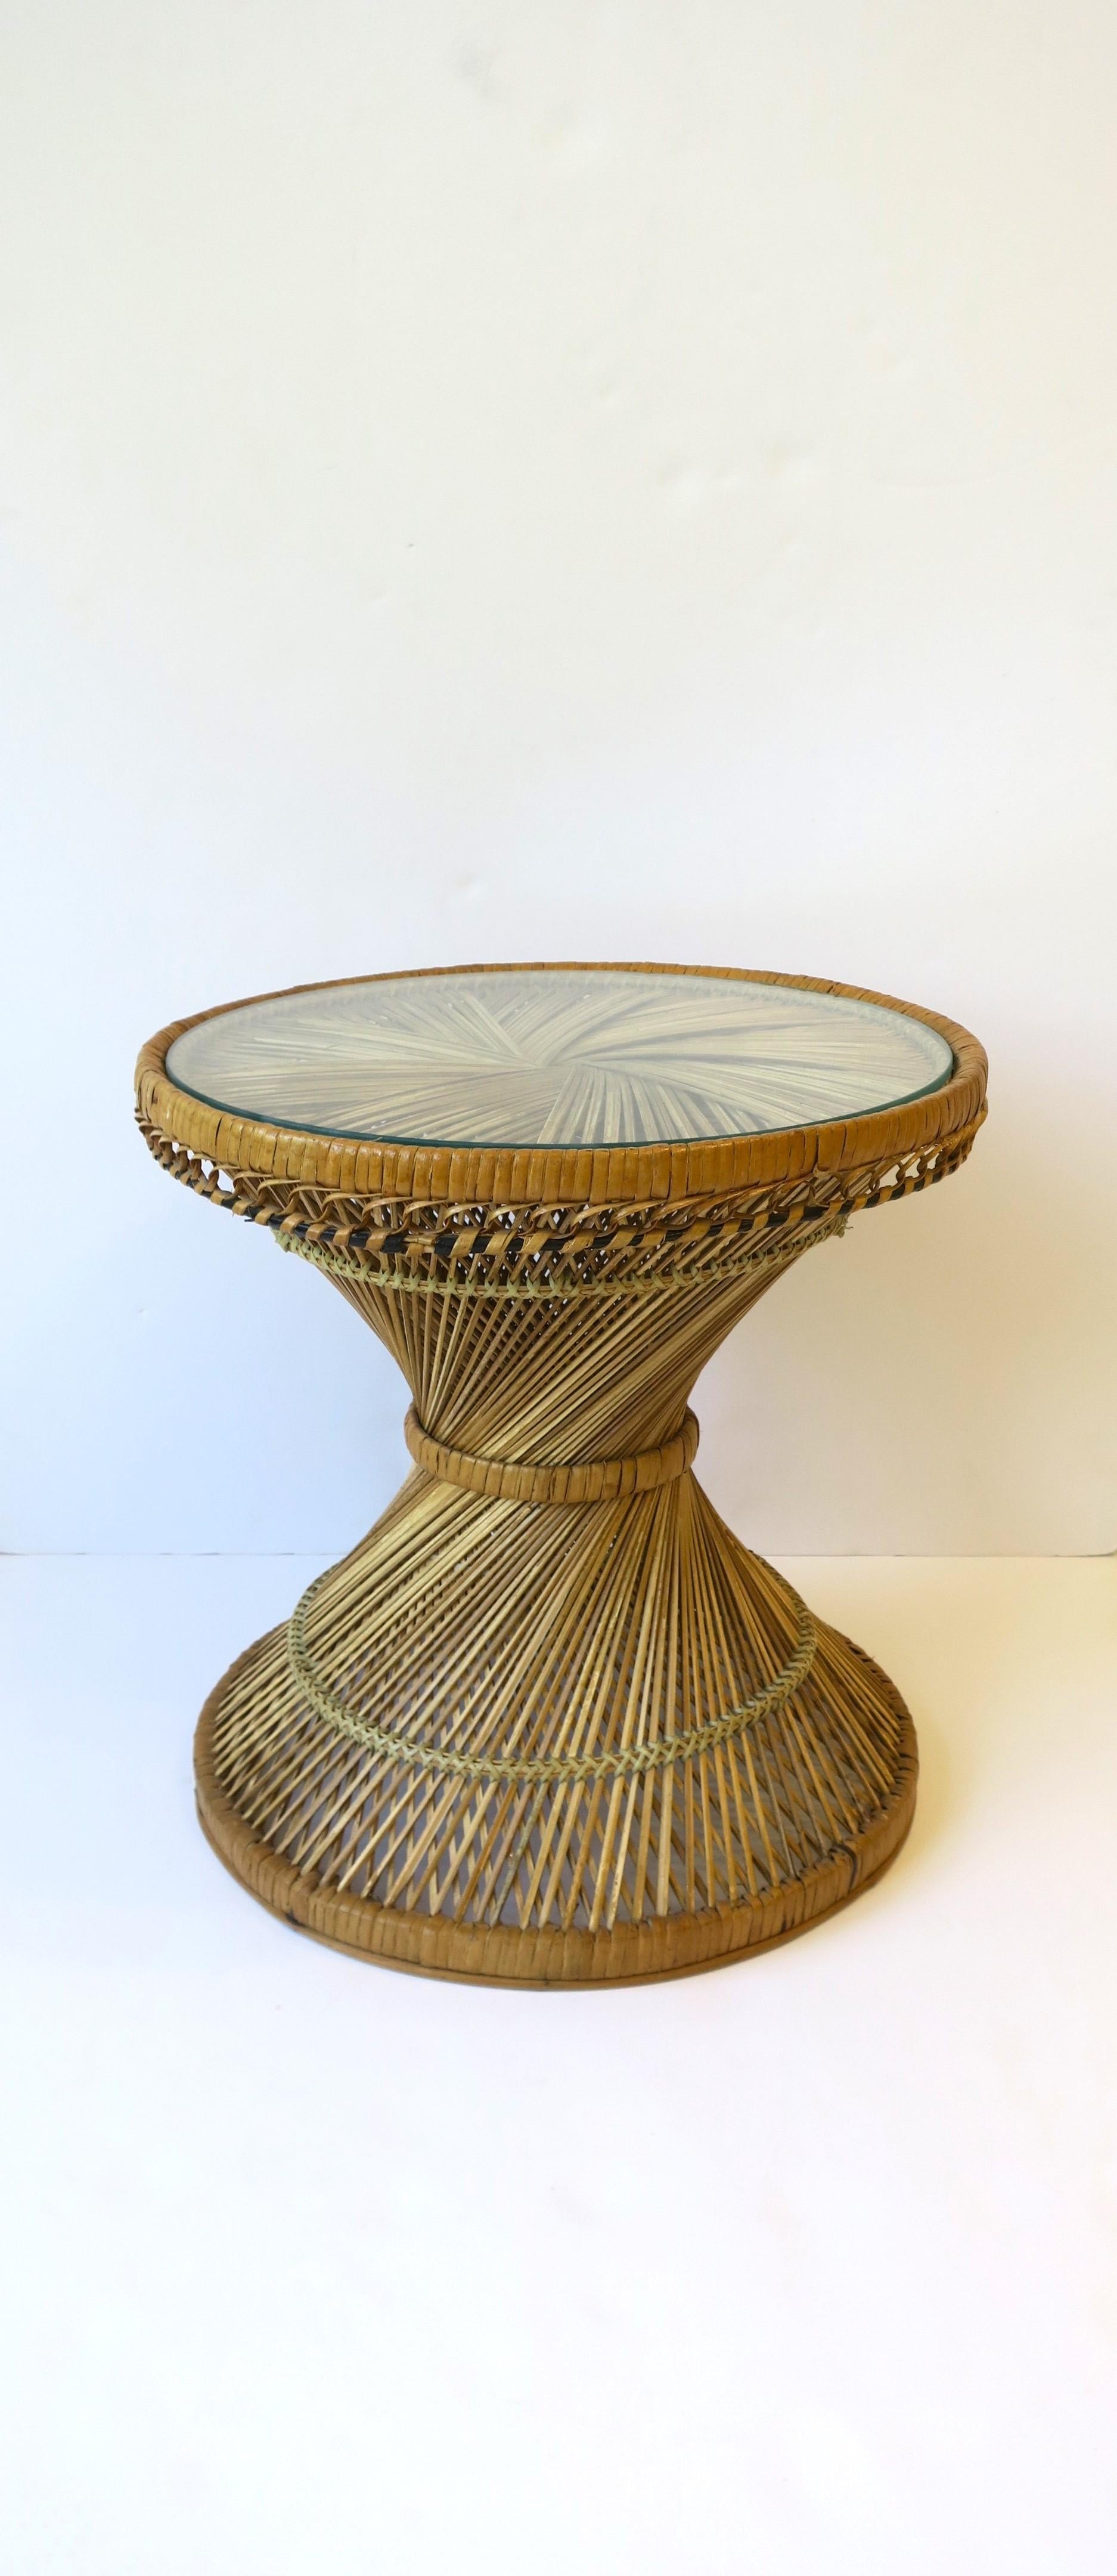 A beautiful and well-made wicker and glass round drinks or side table with hourglass design attributed to designer Emmanuelle Peacock, Bohemian design, circa mid-20th century, Spain. Very good condition as shown in images. Table is a convenient